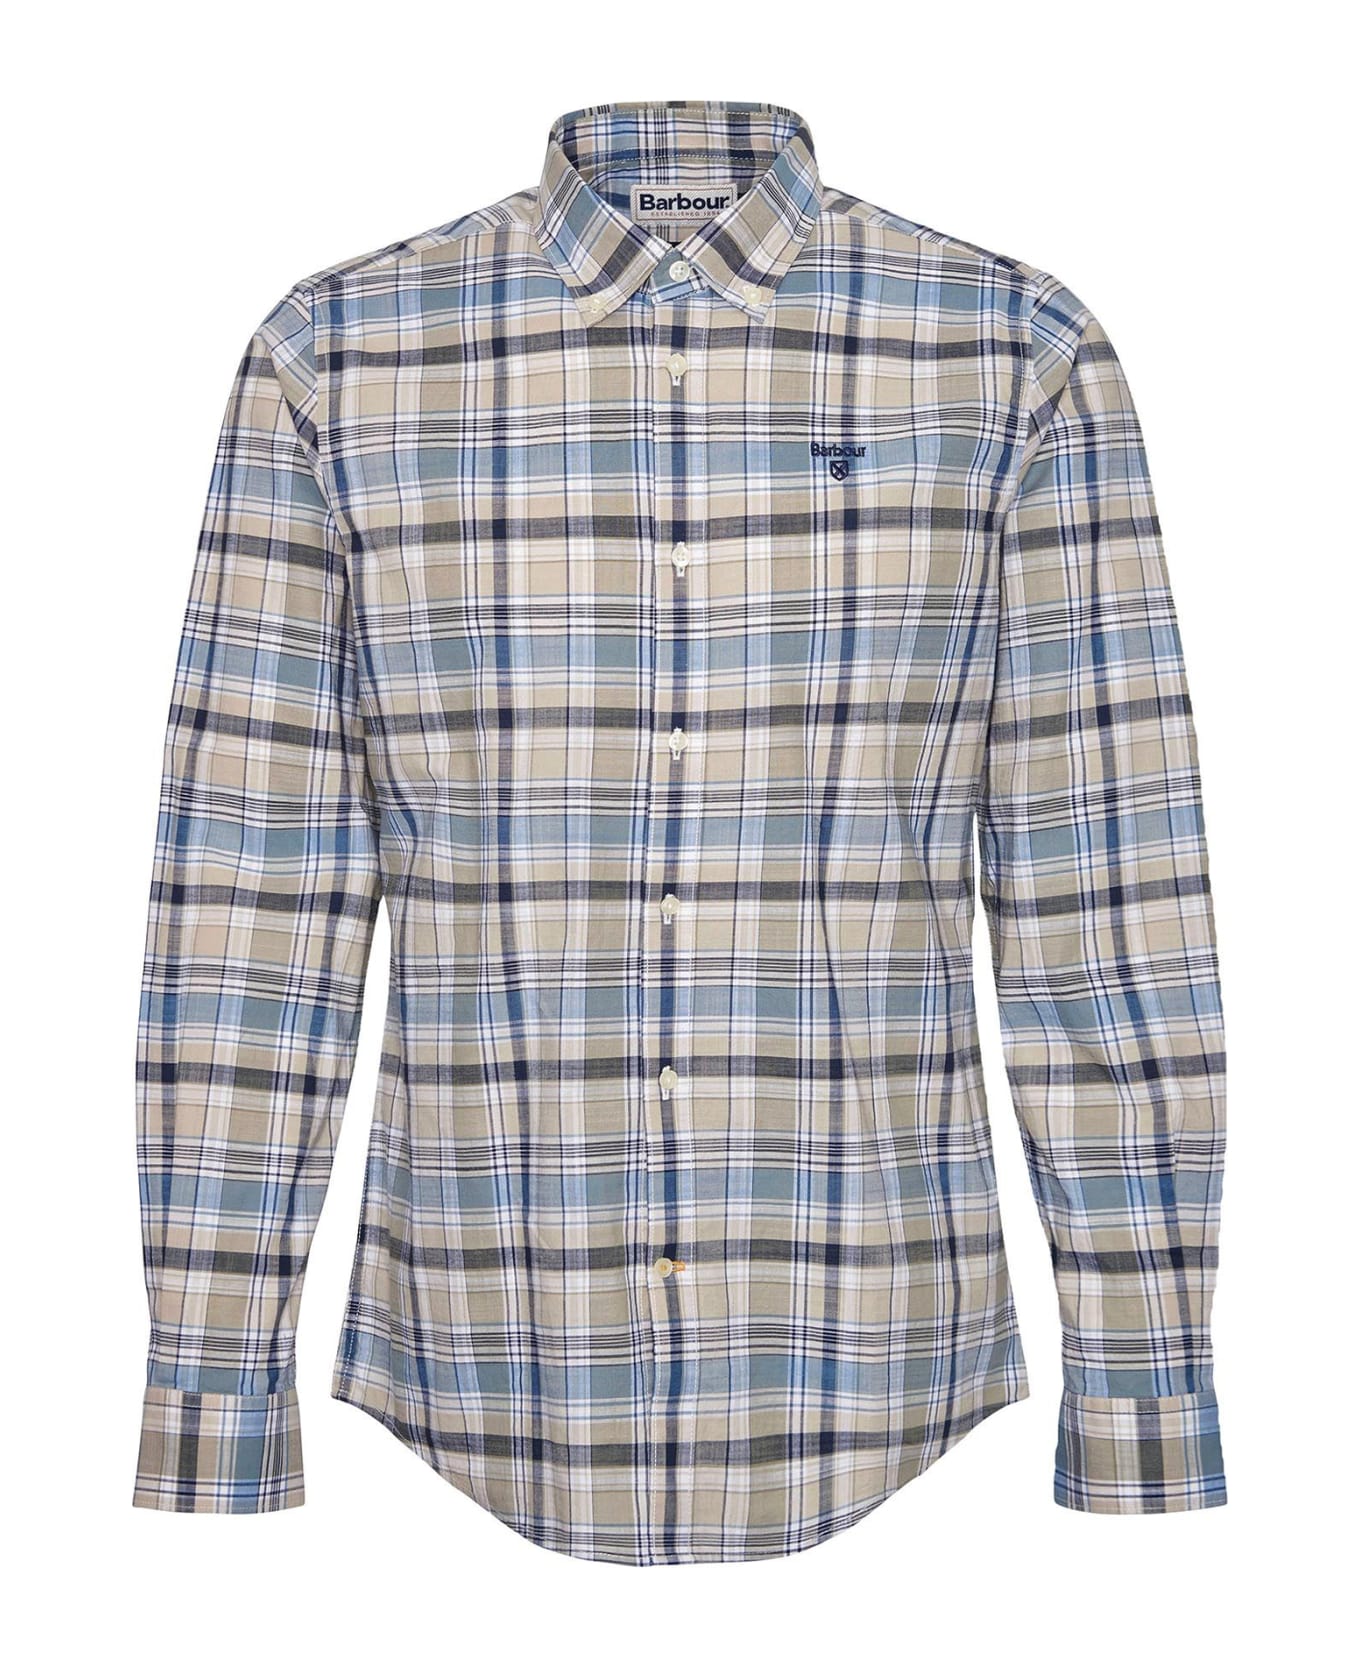 Barbour Checked Shirt With Logo - STONE シャツ